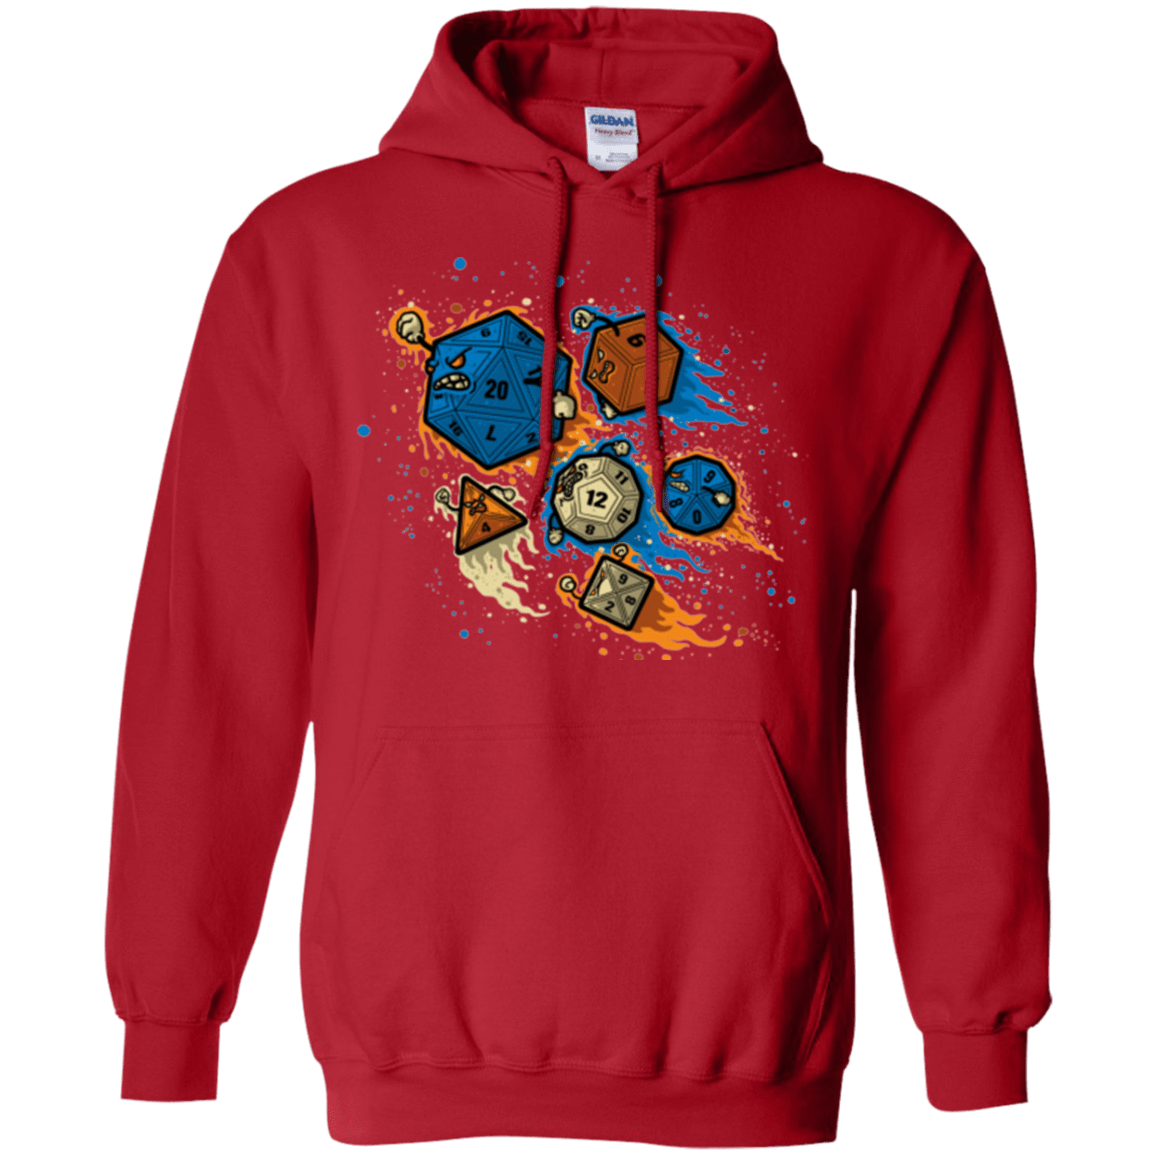 Sweatshirts Red / Small RPG UNITED REMIX Pullover Hoodie